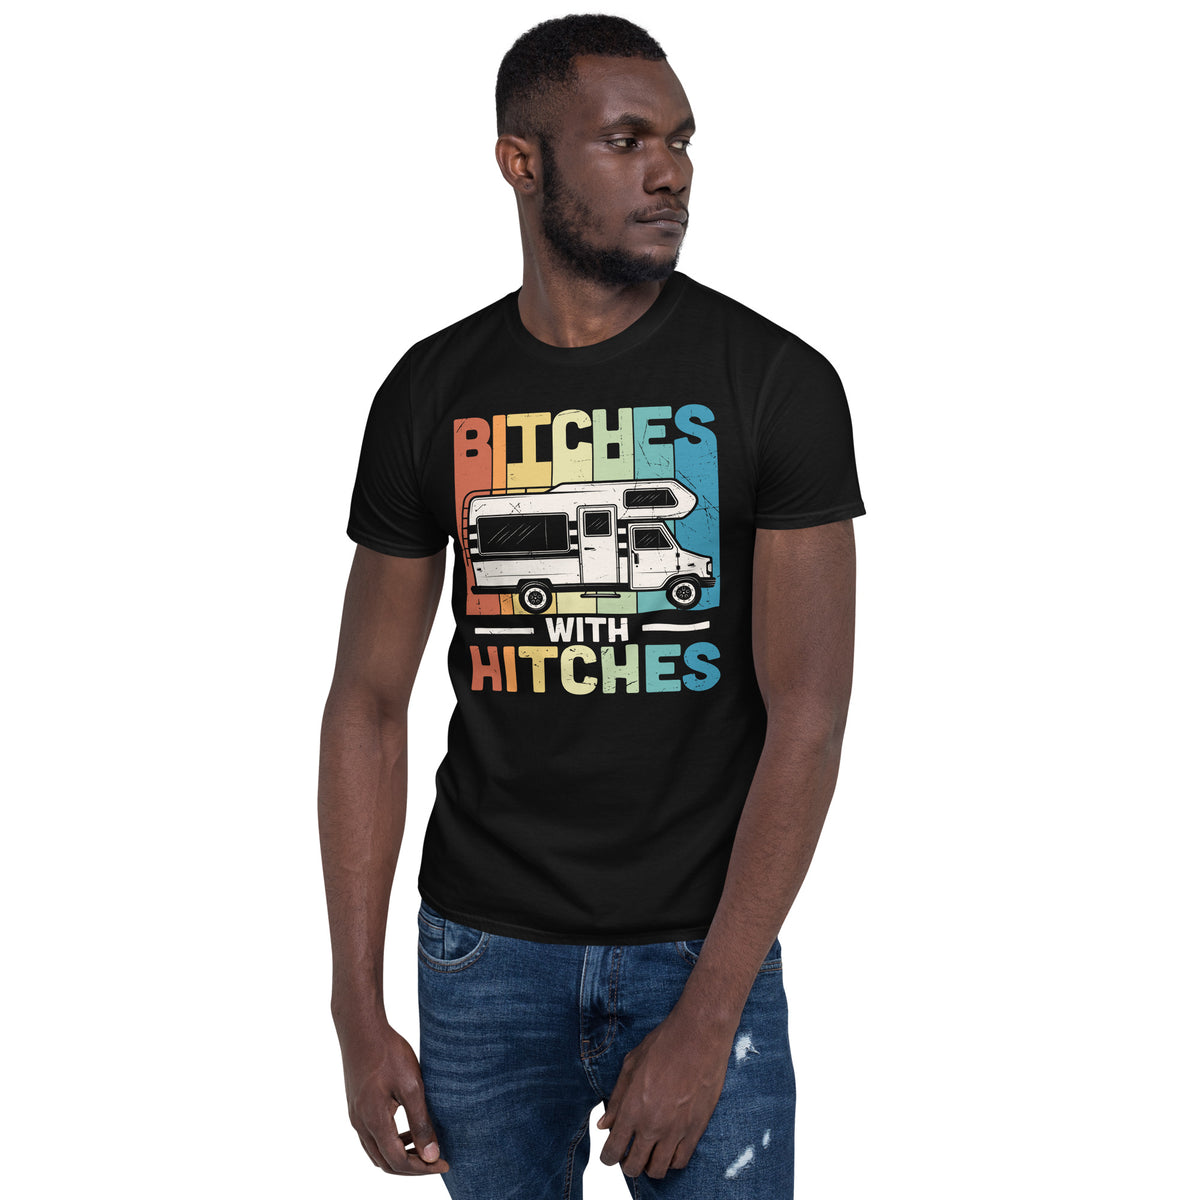 Cooles Herren Spruch Shirt "Bitches with Hitches"